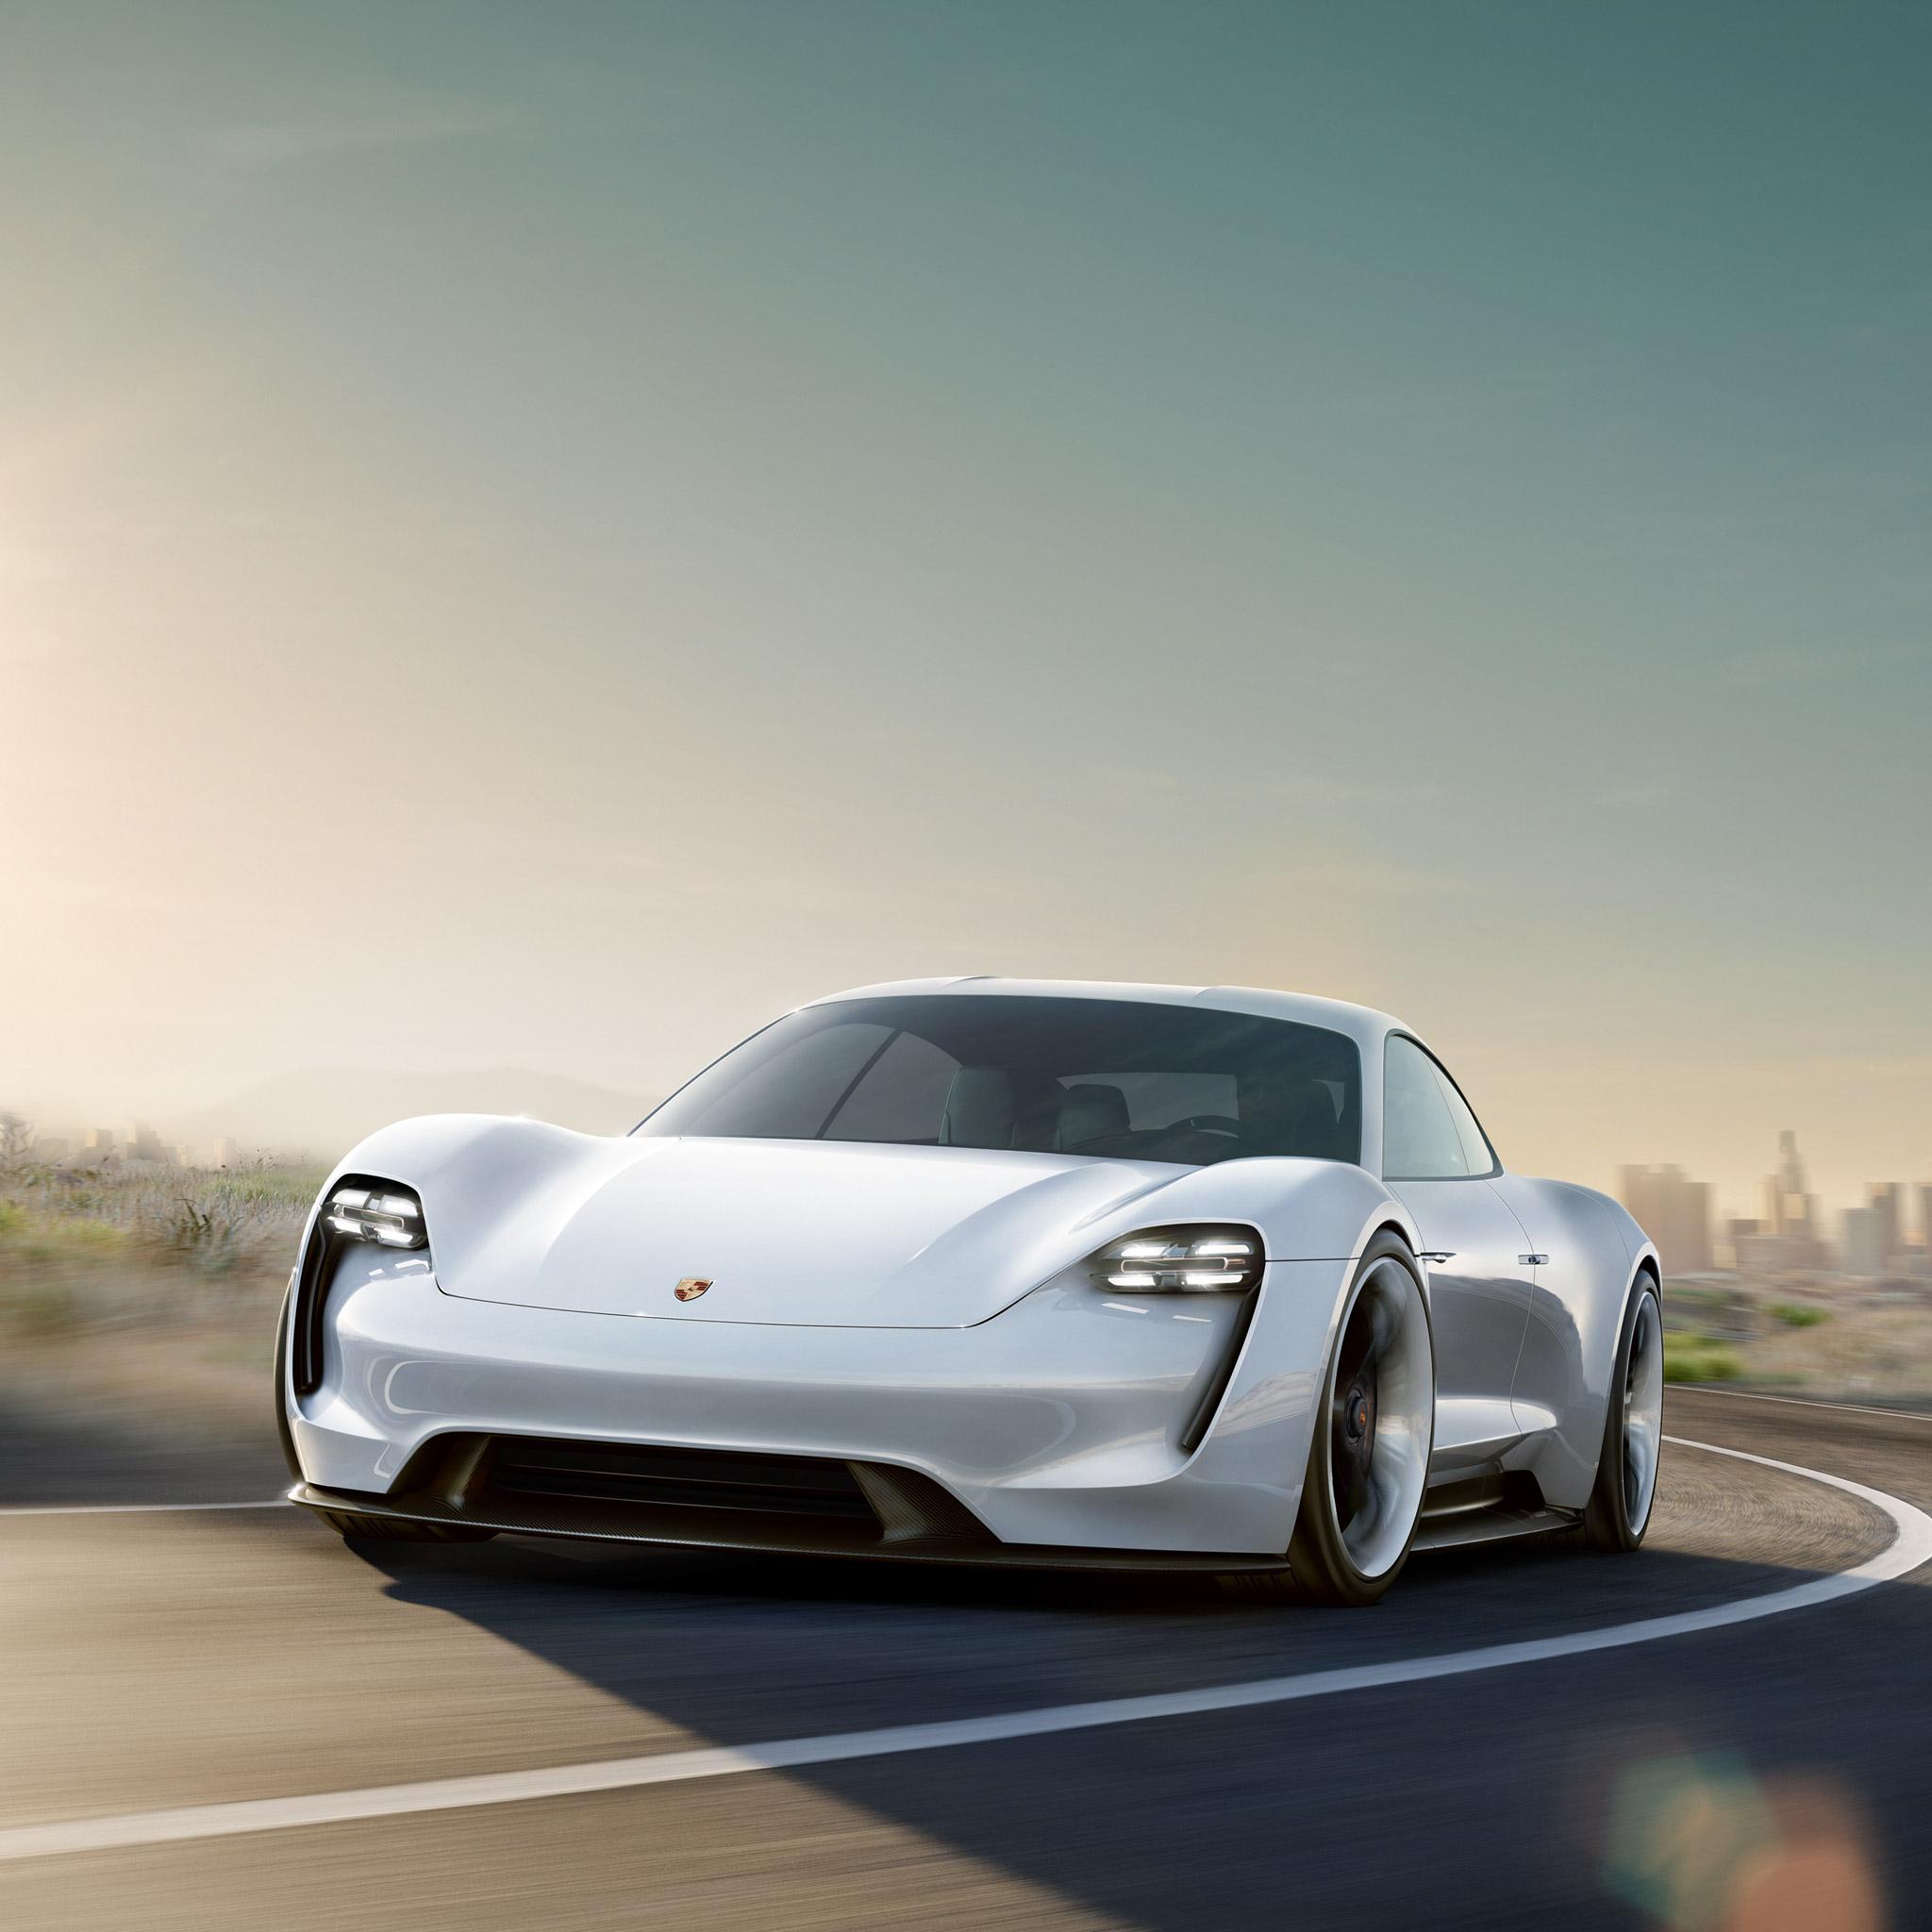 Tribute to tomorrow. Porsche Concept Study Mission E. Dr. Ing